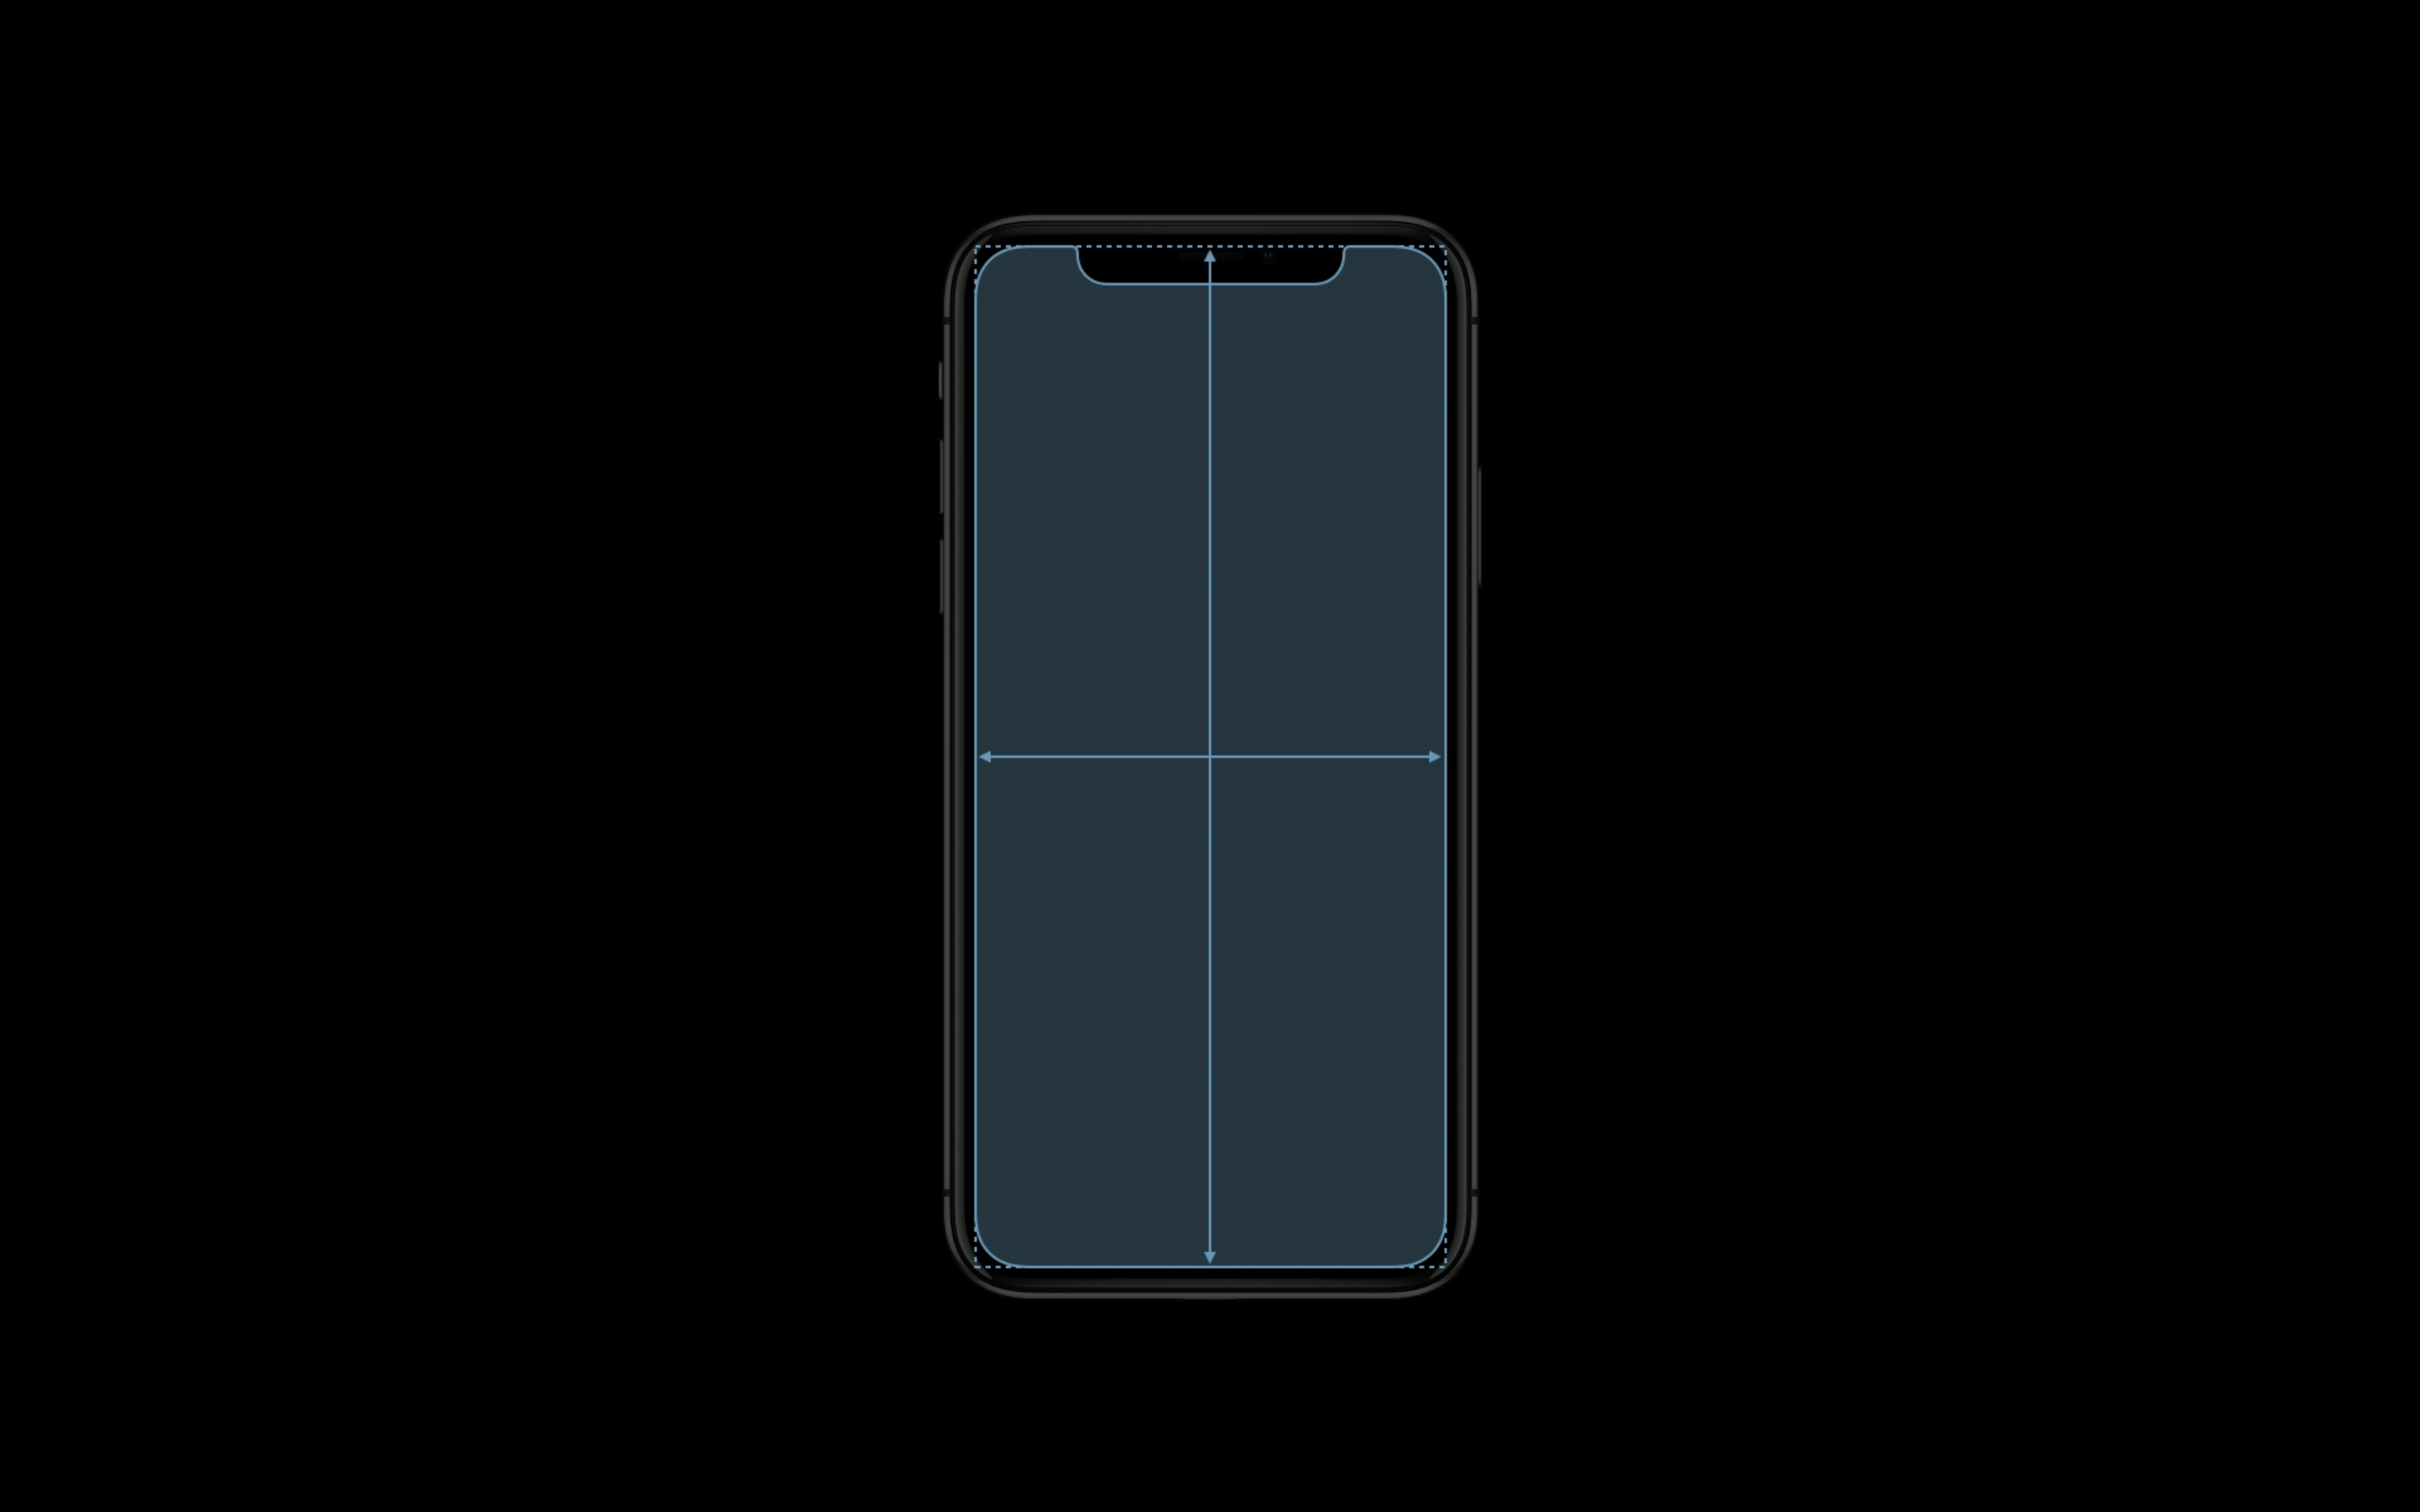 iphone 11 display notch leaked images